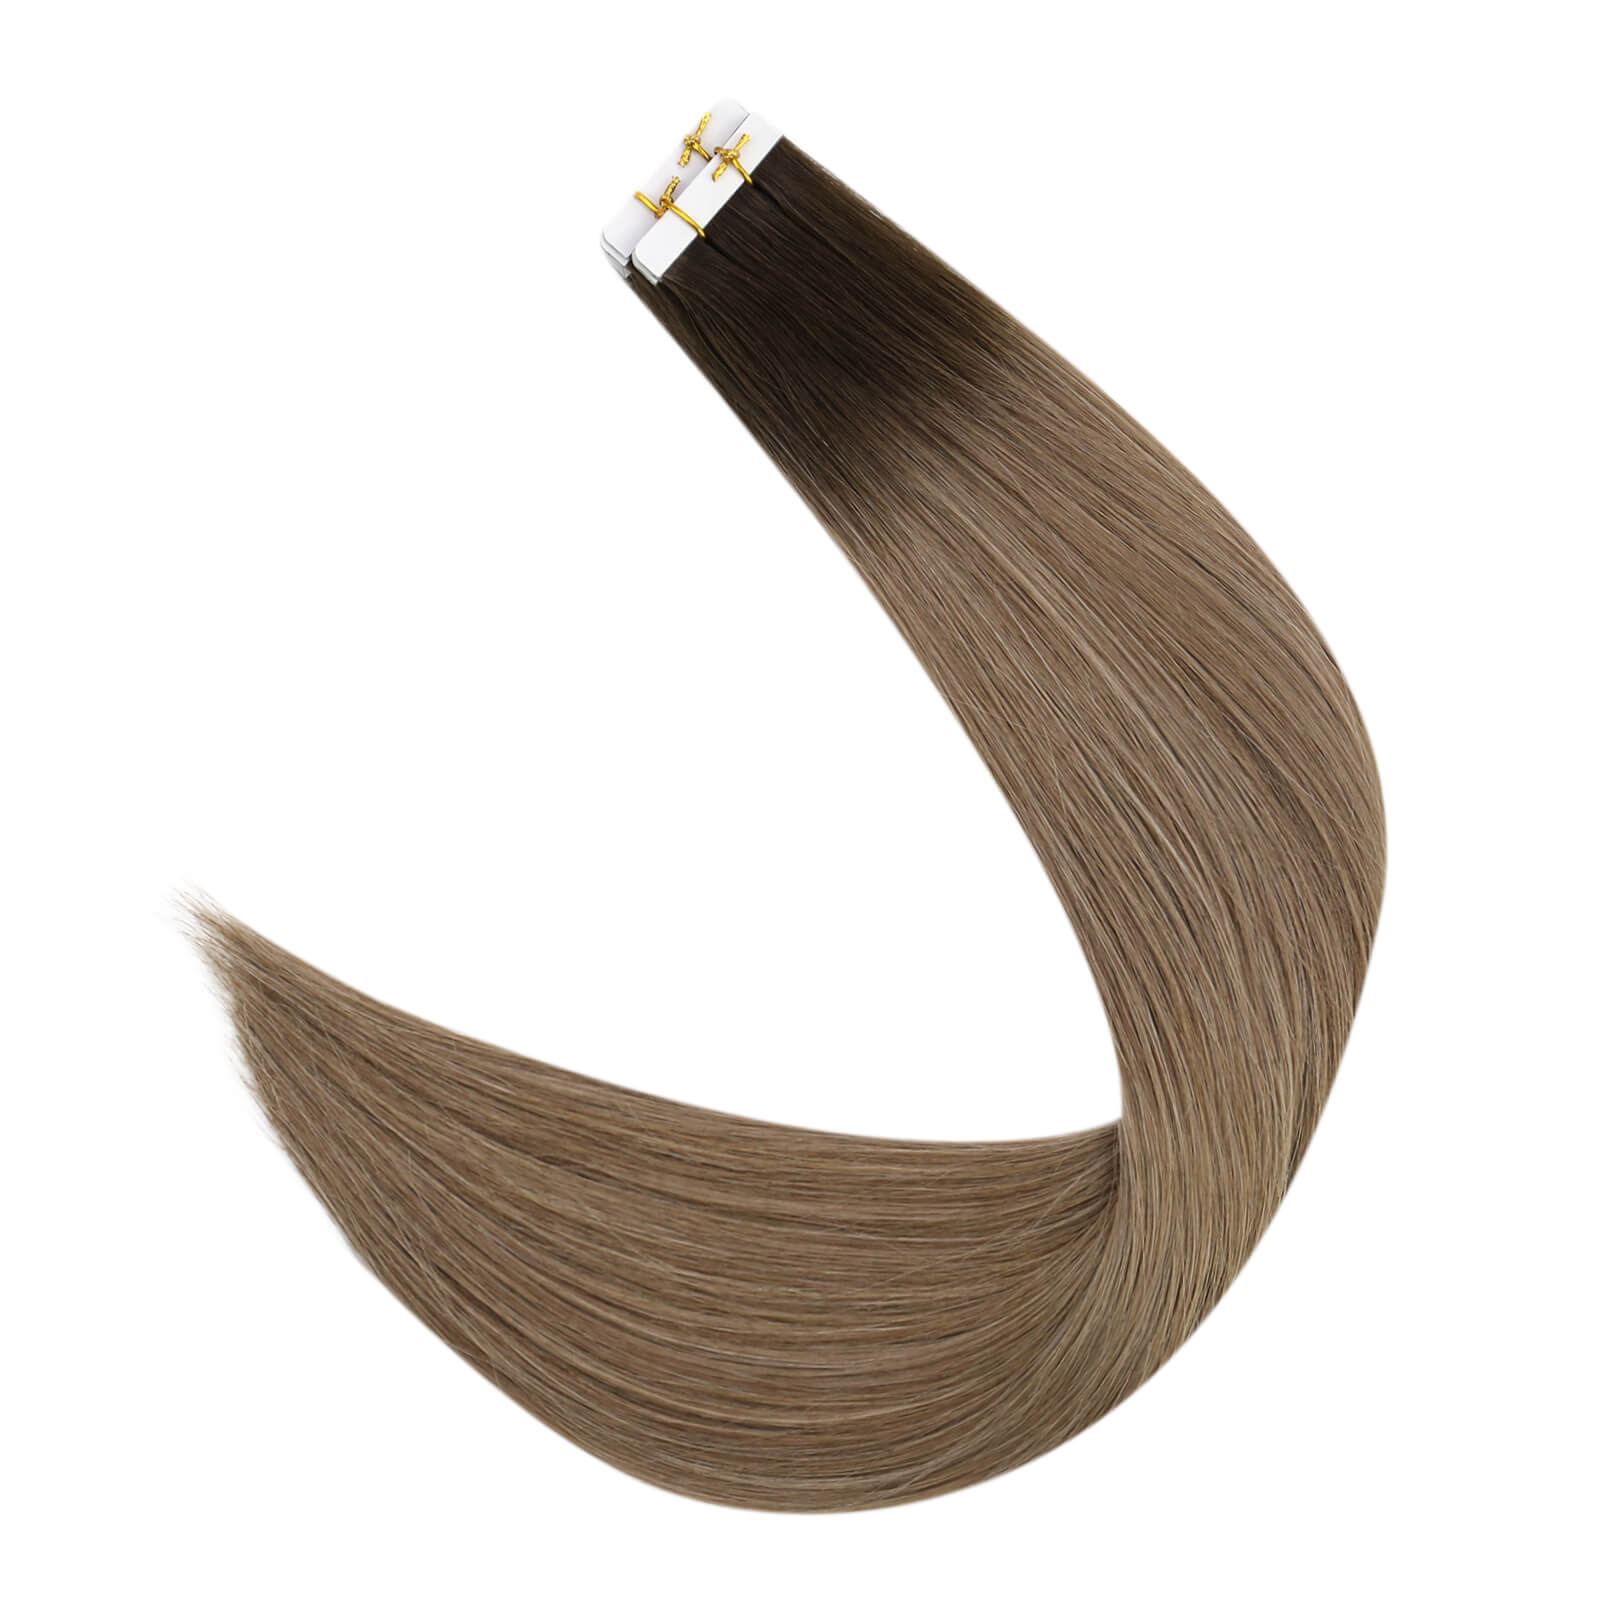 Tape in Hair Extensions Balayage Real Human Virgin Hair Extensions#R2/DXB/18